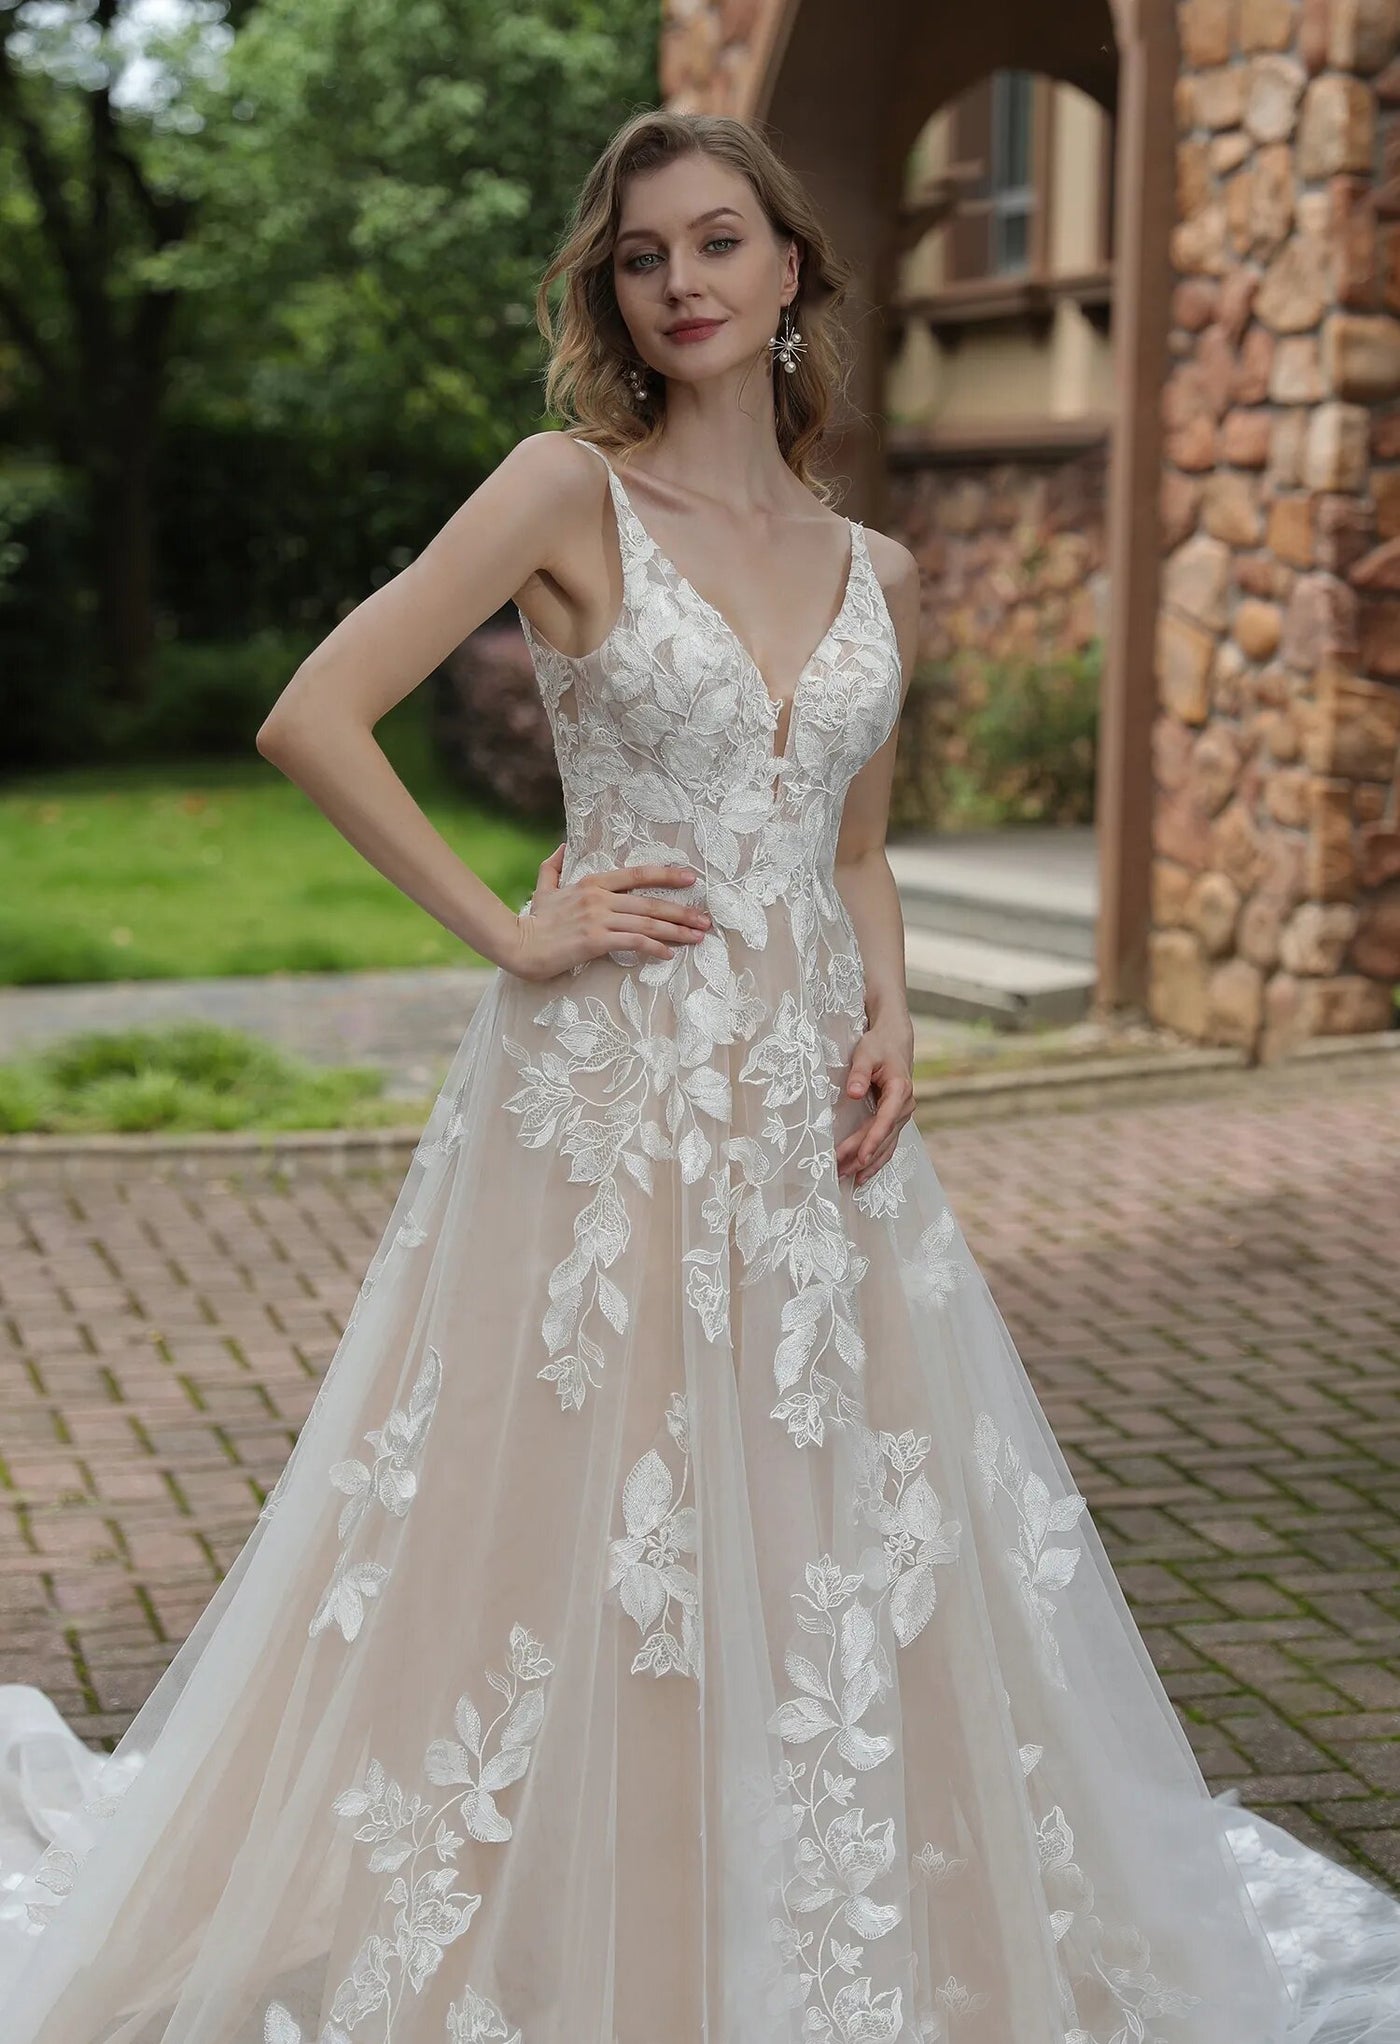 A beautiful Luxurious Floral Lace A-Line Wedding Dress With Sheer Train and v-neck with appliques is available at bridal shops in London from Bergamot Bridal.